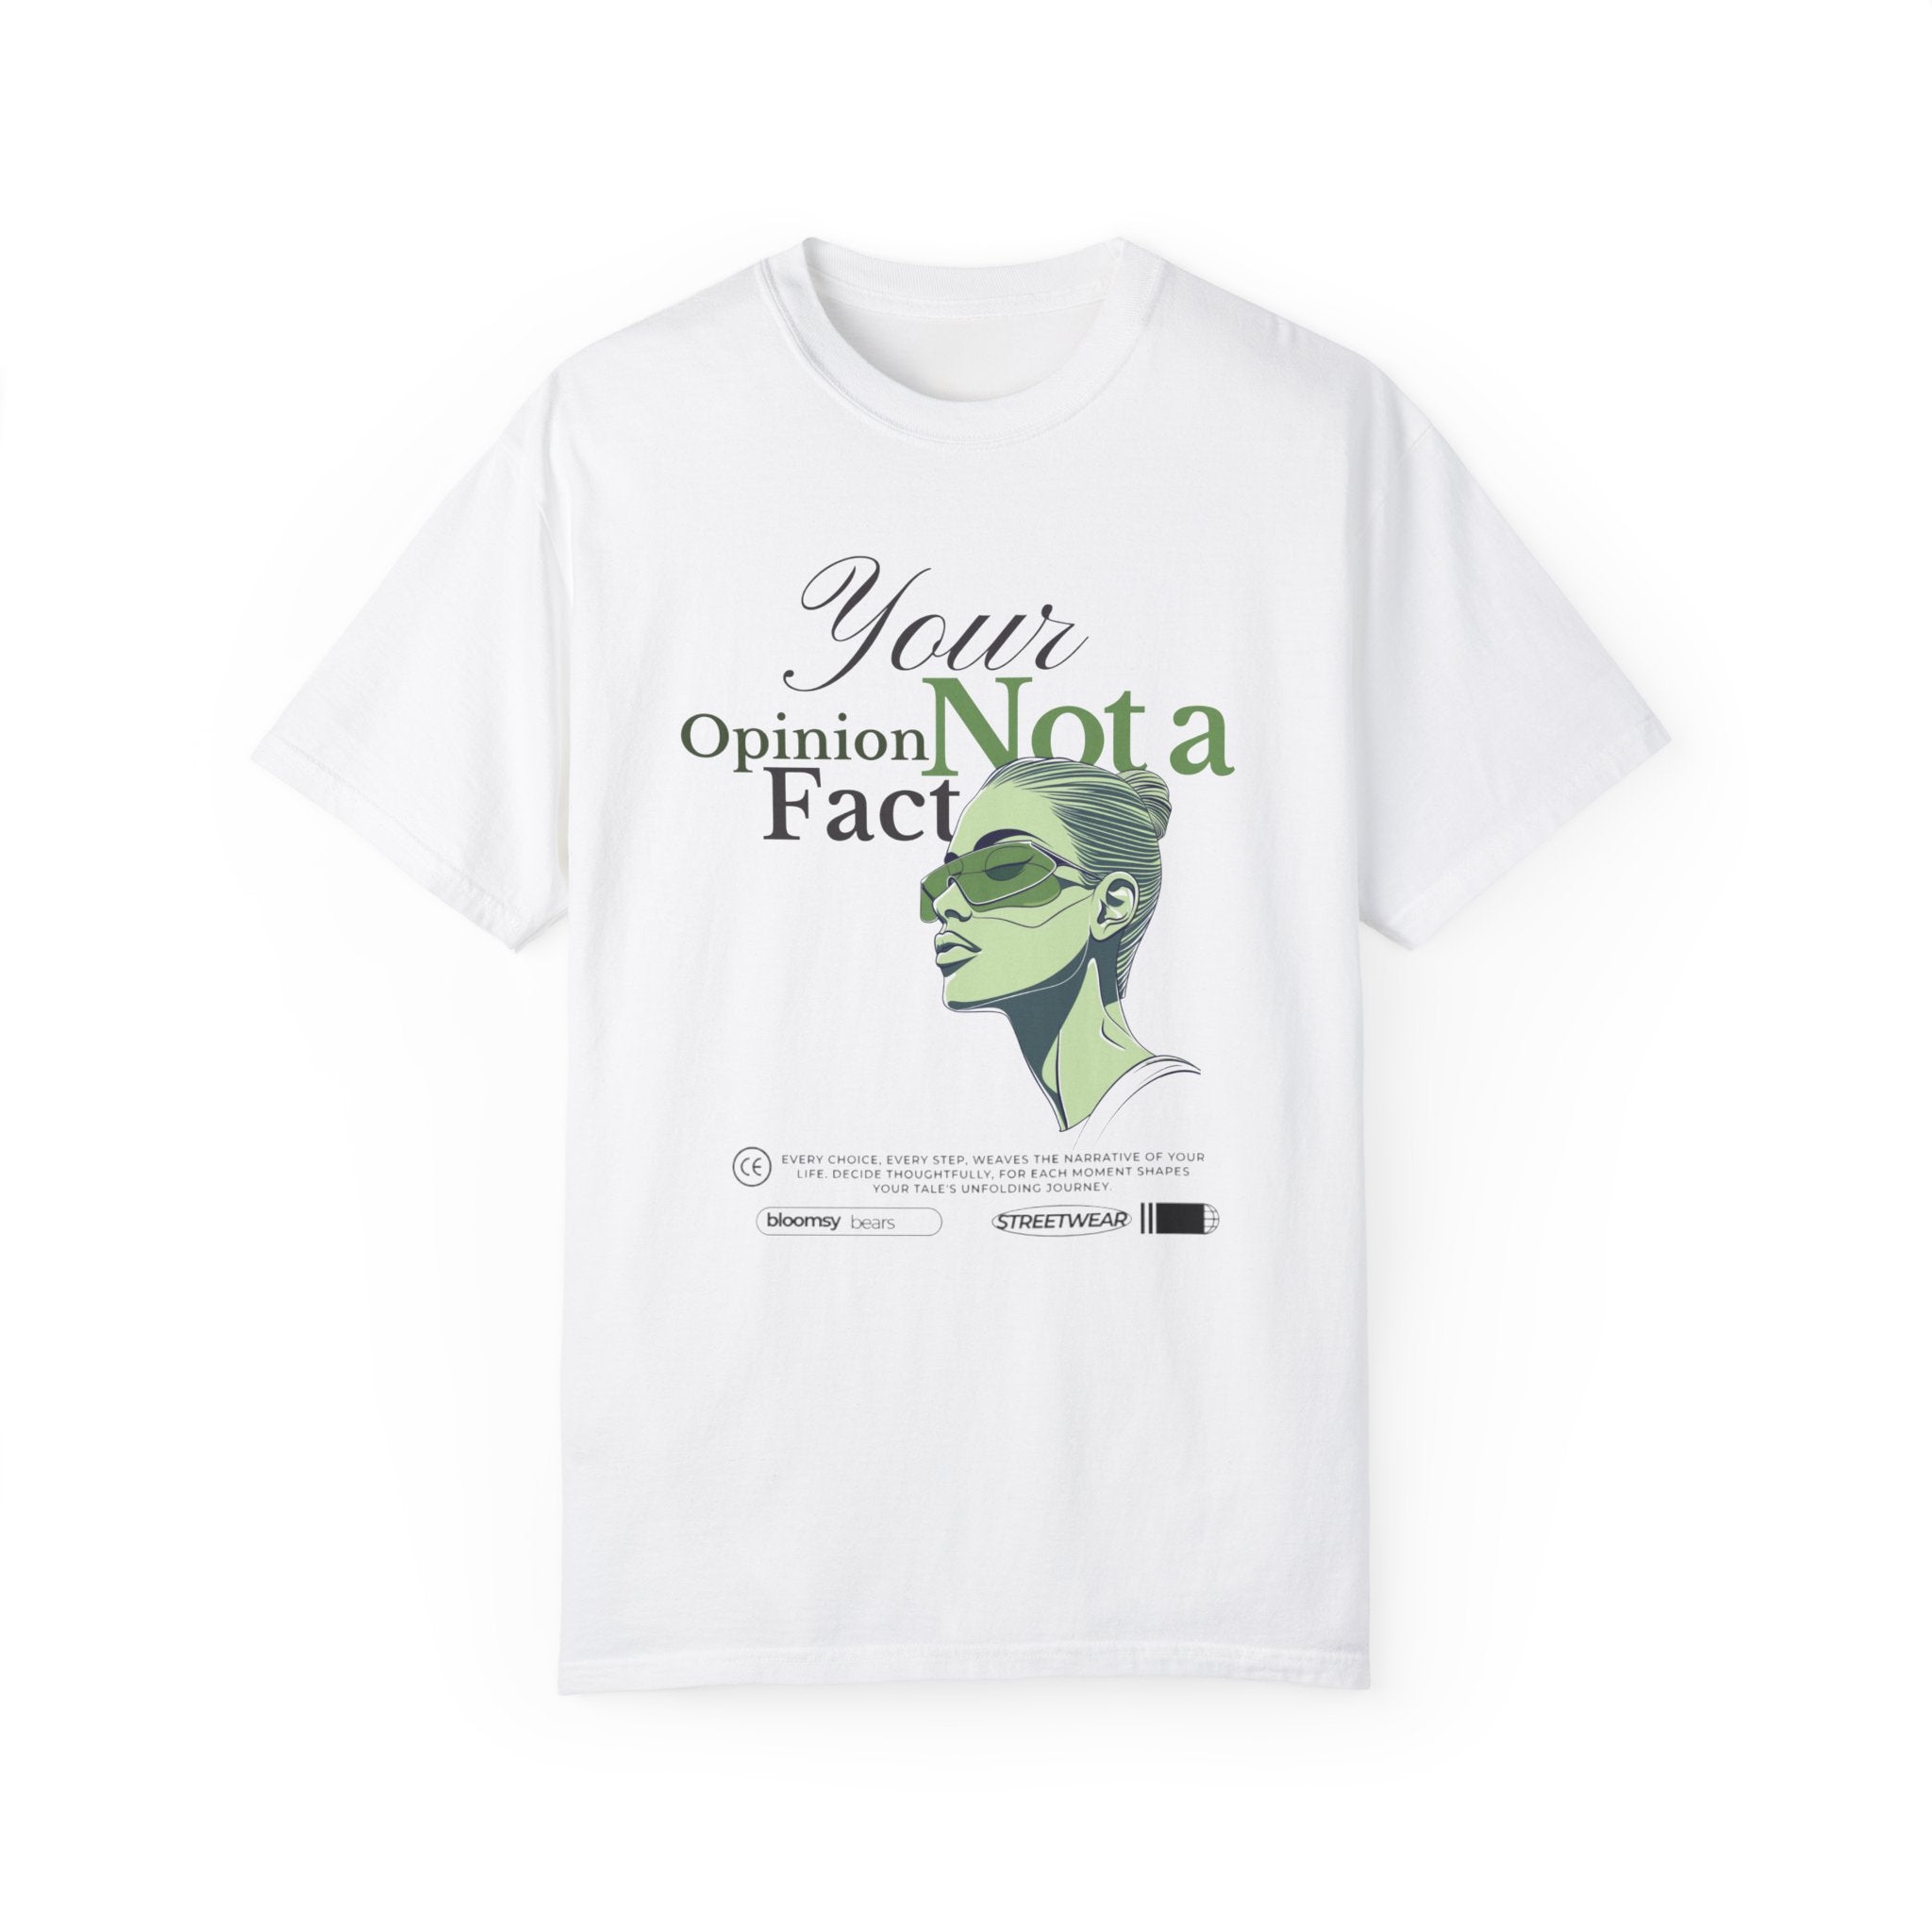 Assertive Expression: Female Cool T Shirt,'Your Opinion Not a Fact' White Female